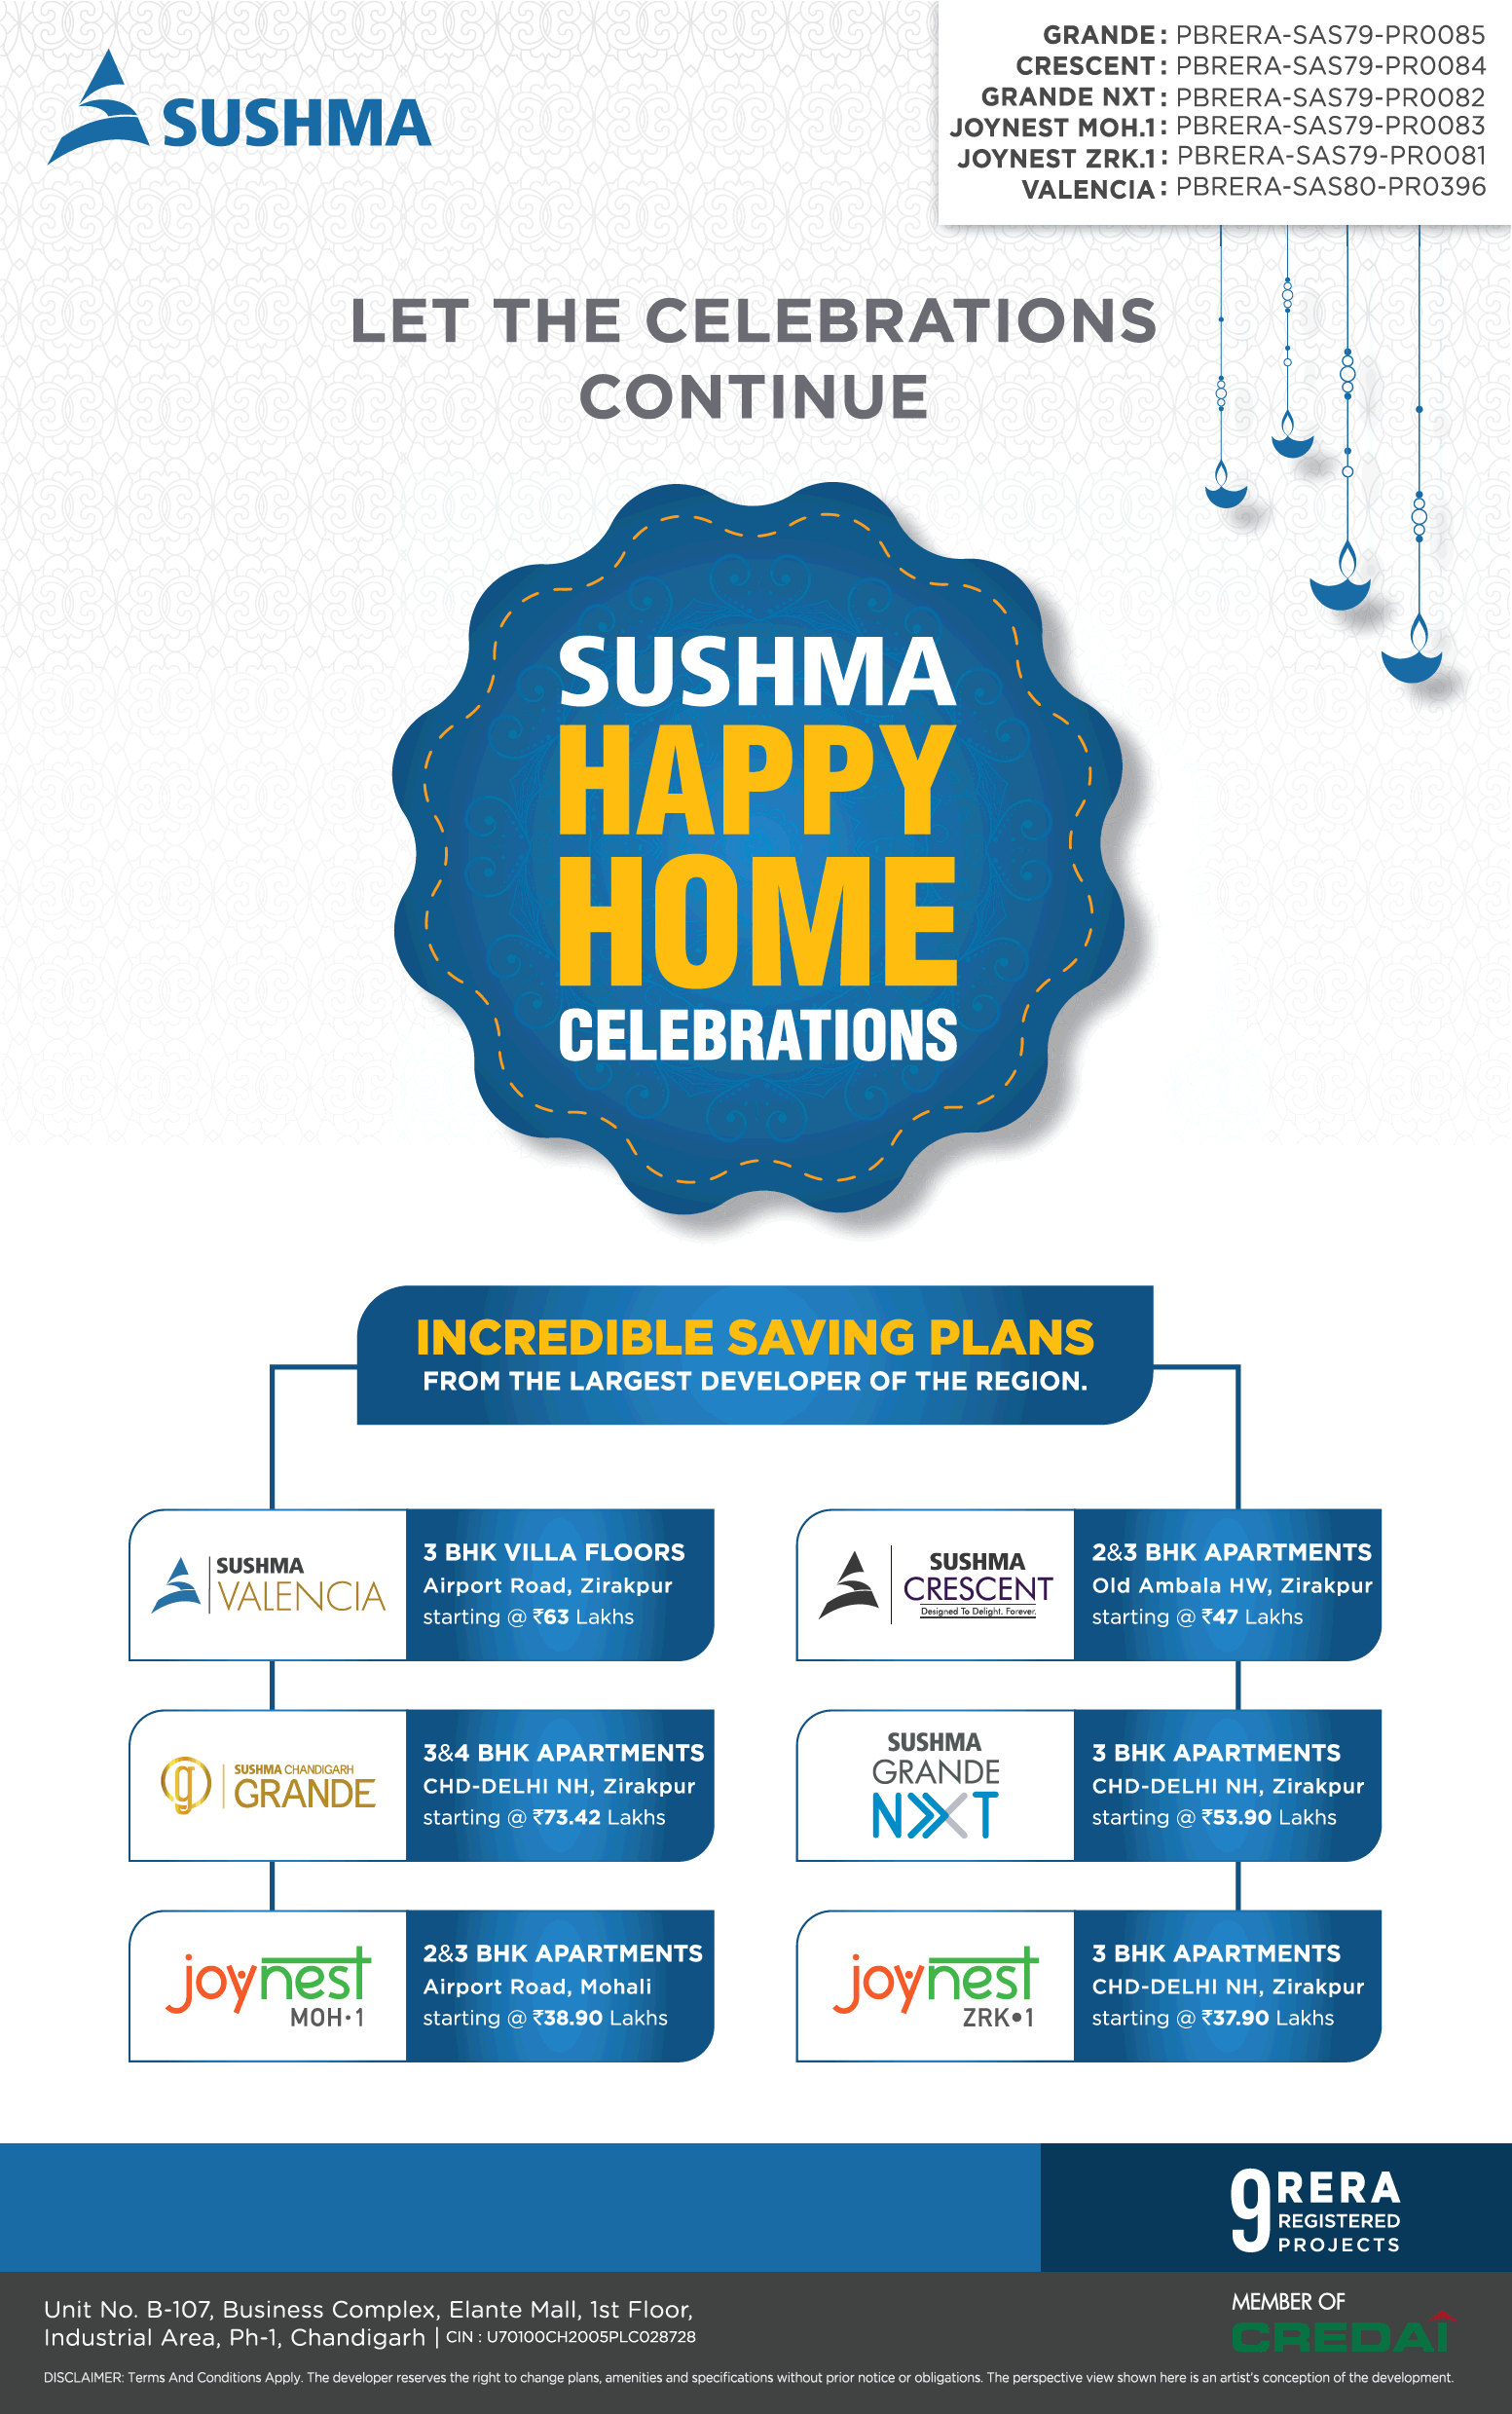 Let the celebrations continue at Sushma Buildtech in Chandigarh Update